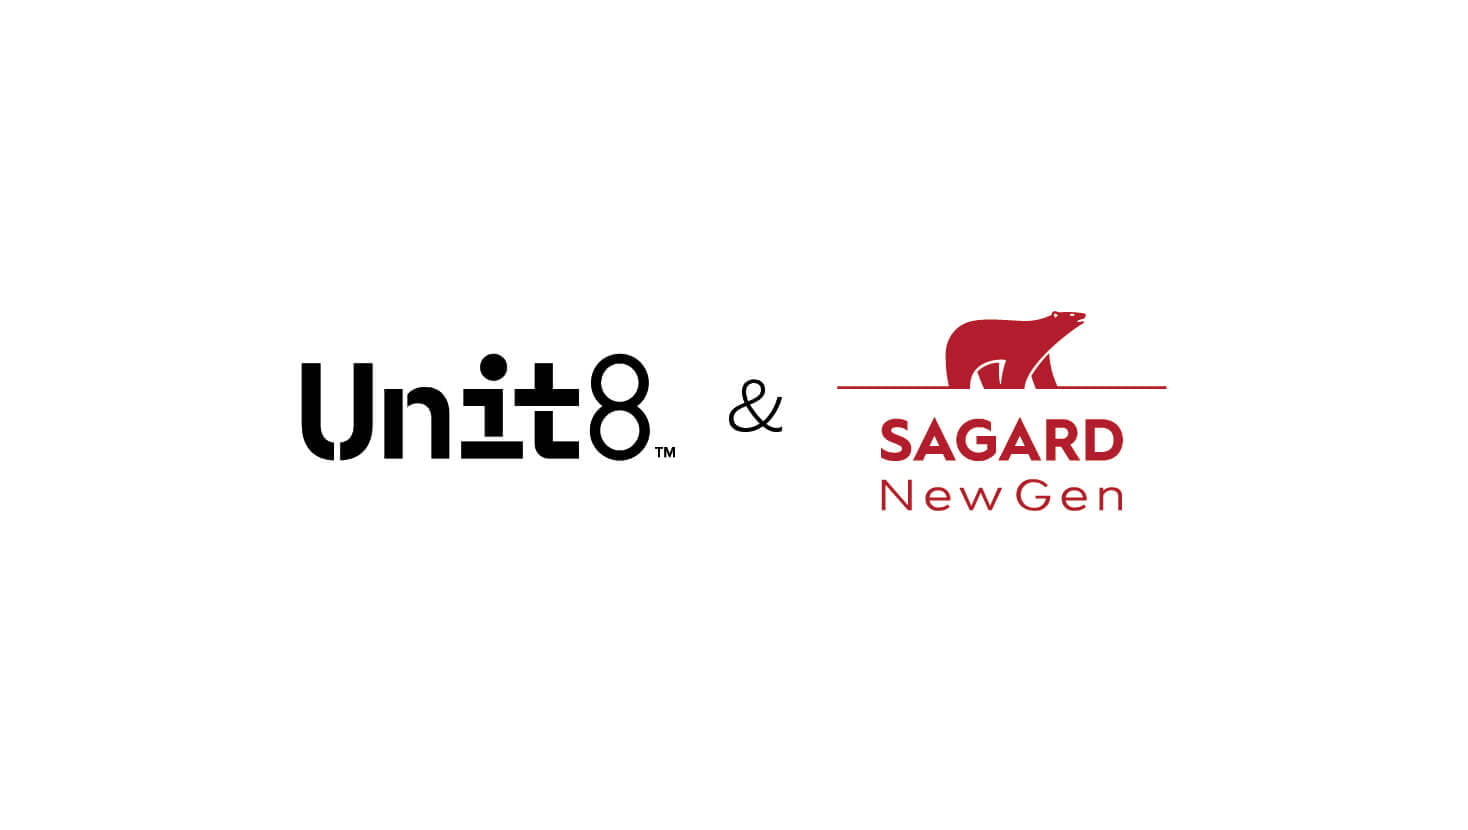 Switzerland’s fastest-growing AI company Unit8 welcomes Sagard NewGen as an investor, to accelerate its next phases of growth